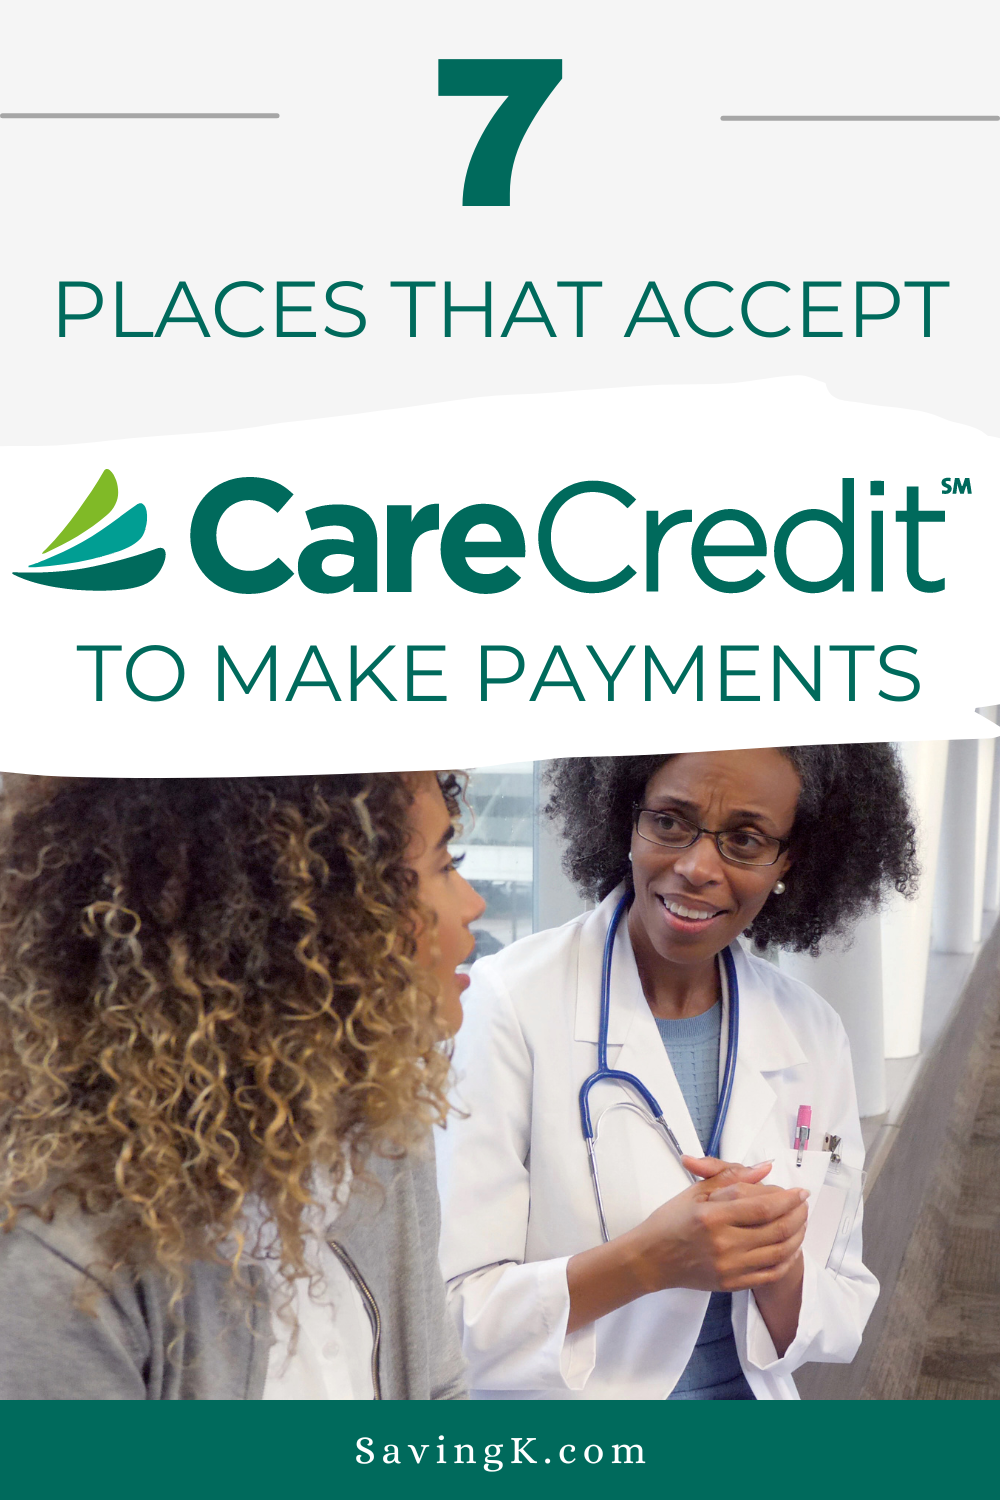 Exploring healthcare financing options: a patient discusses CareCredit payment acceptance with a healthcare professional.